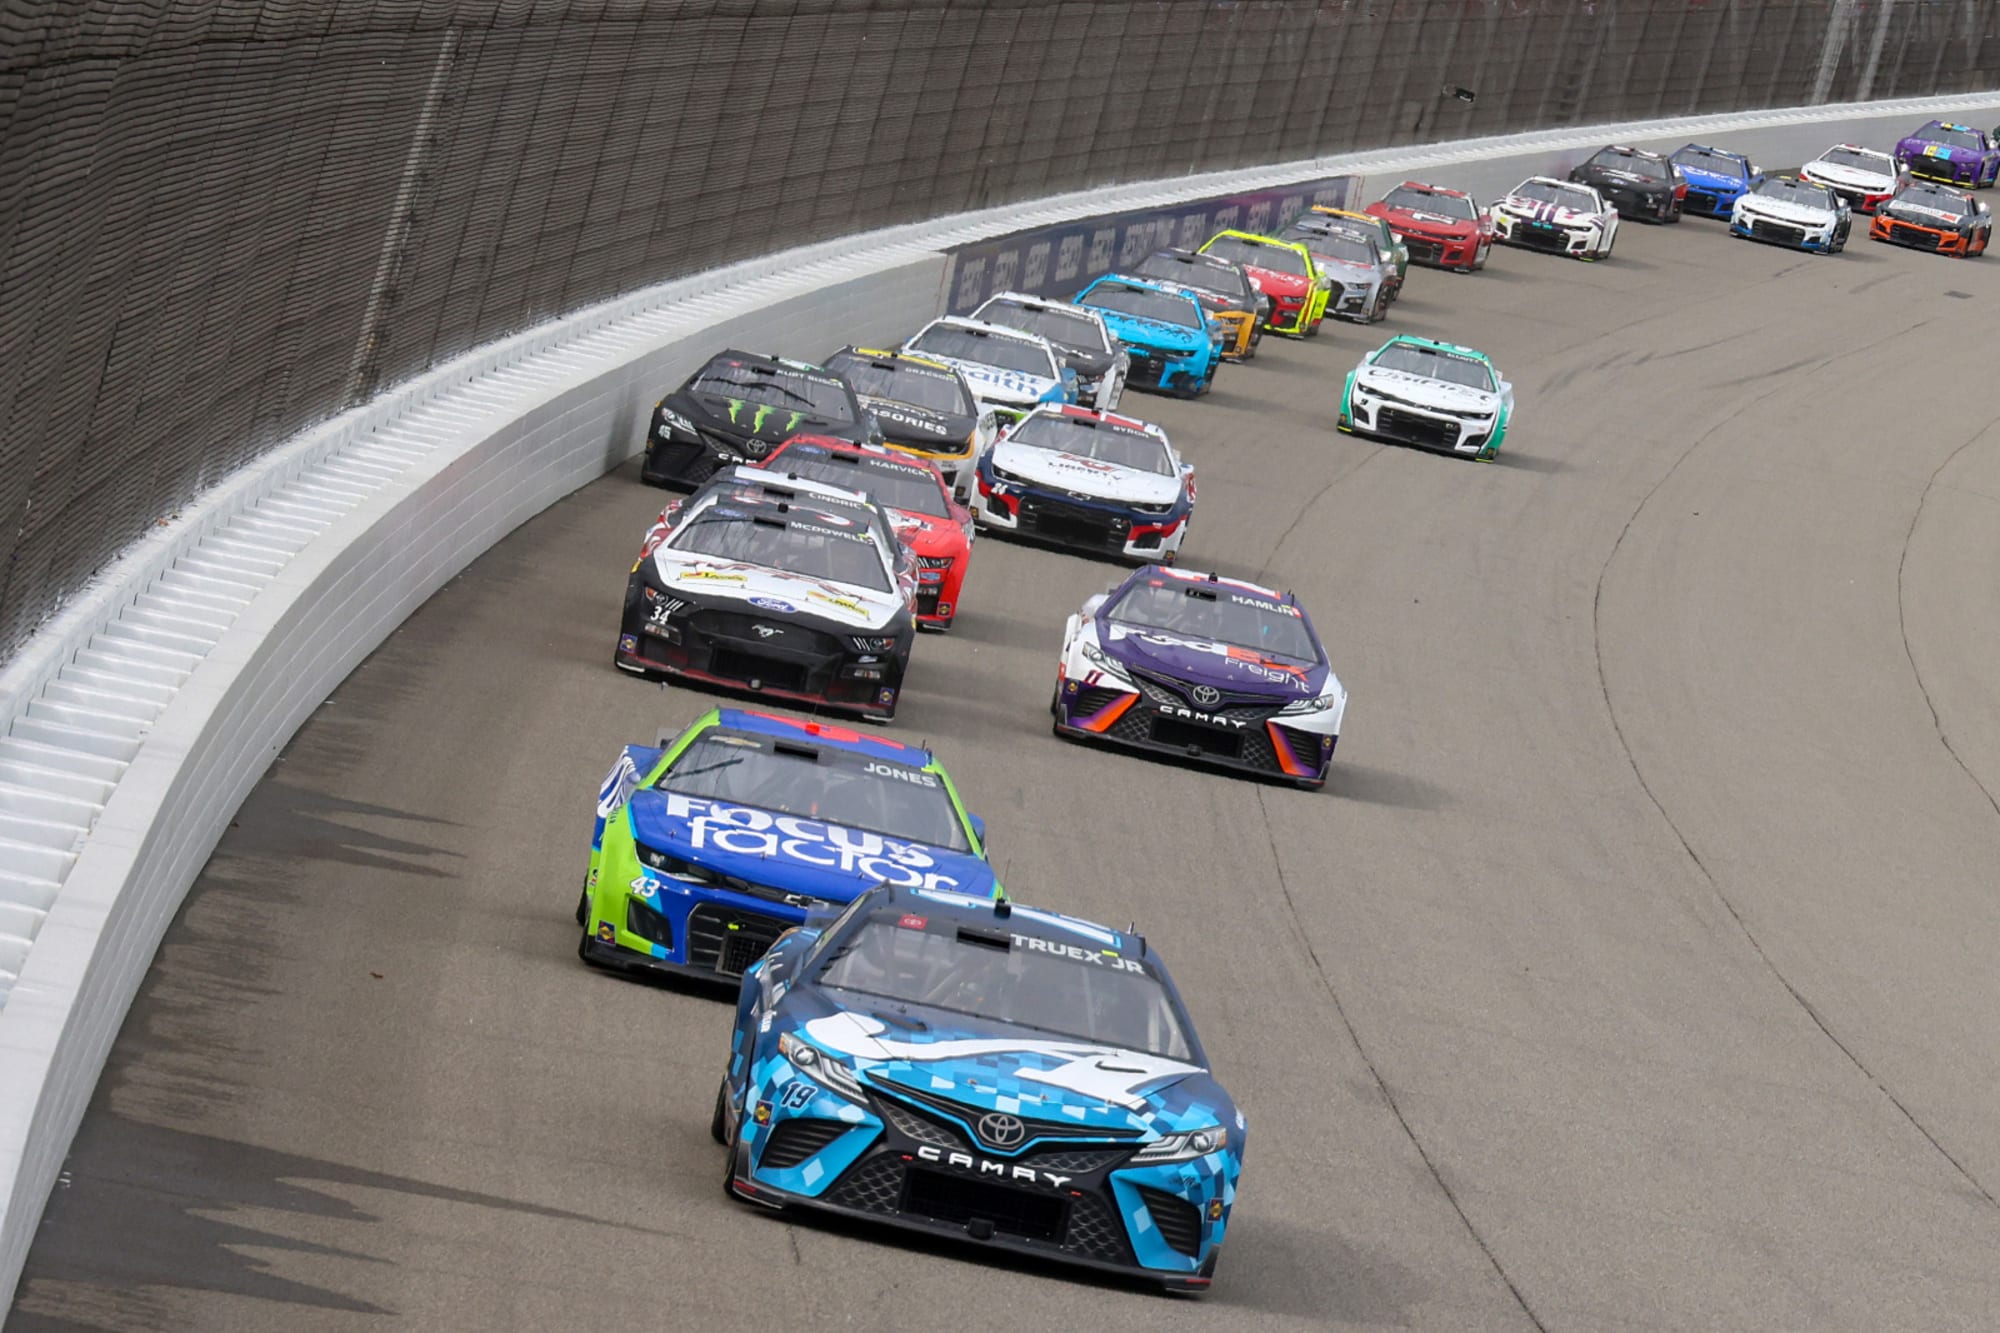 NASCAR Michigan race not being broadcast on NBC